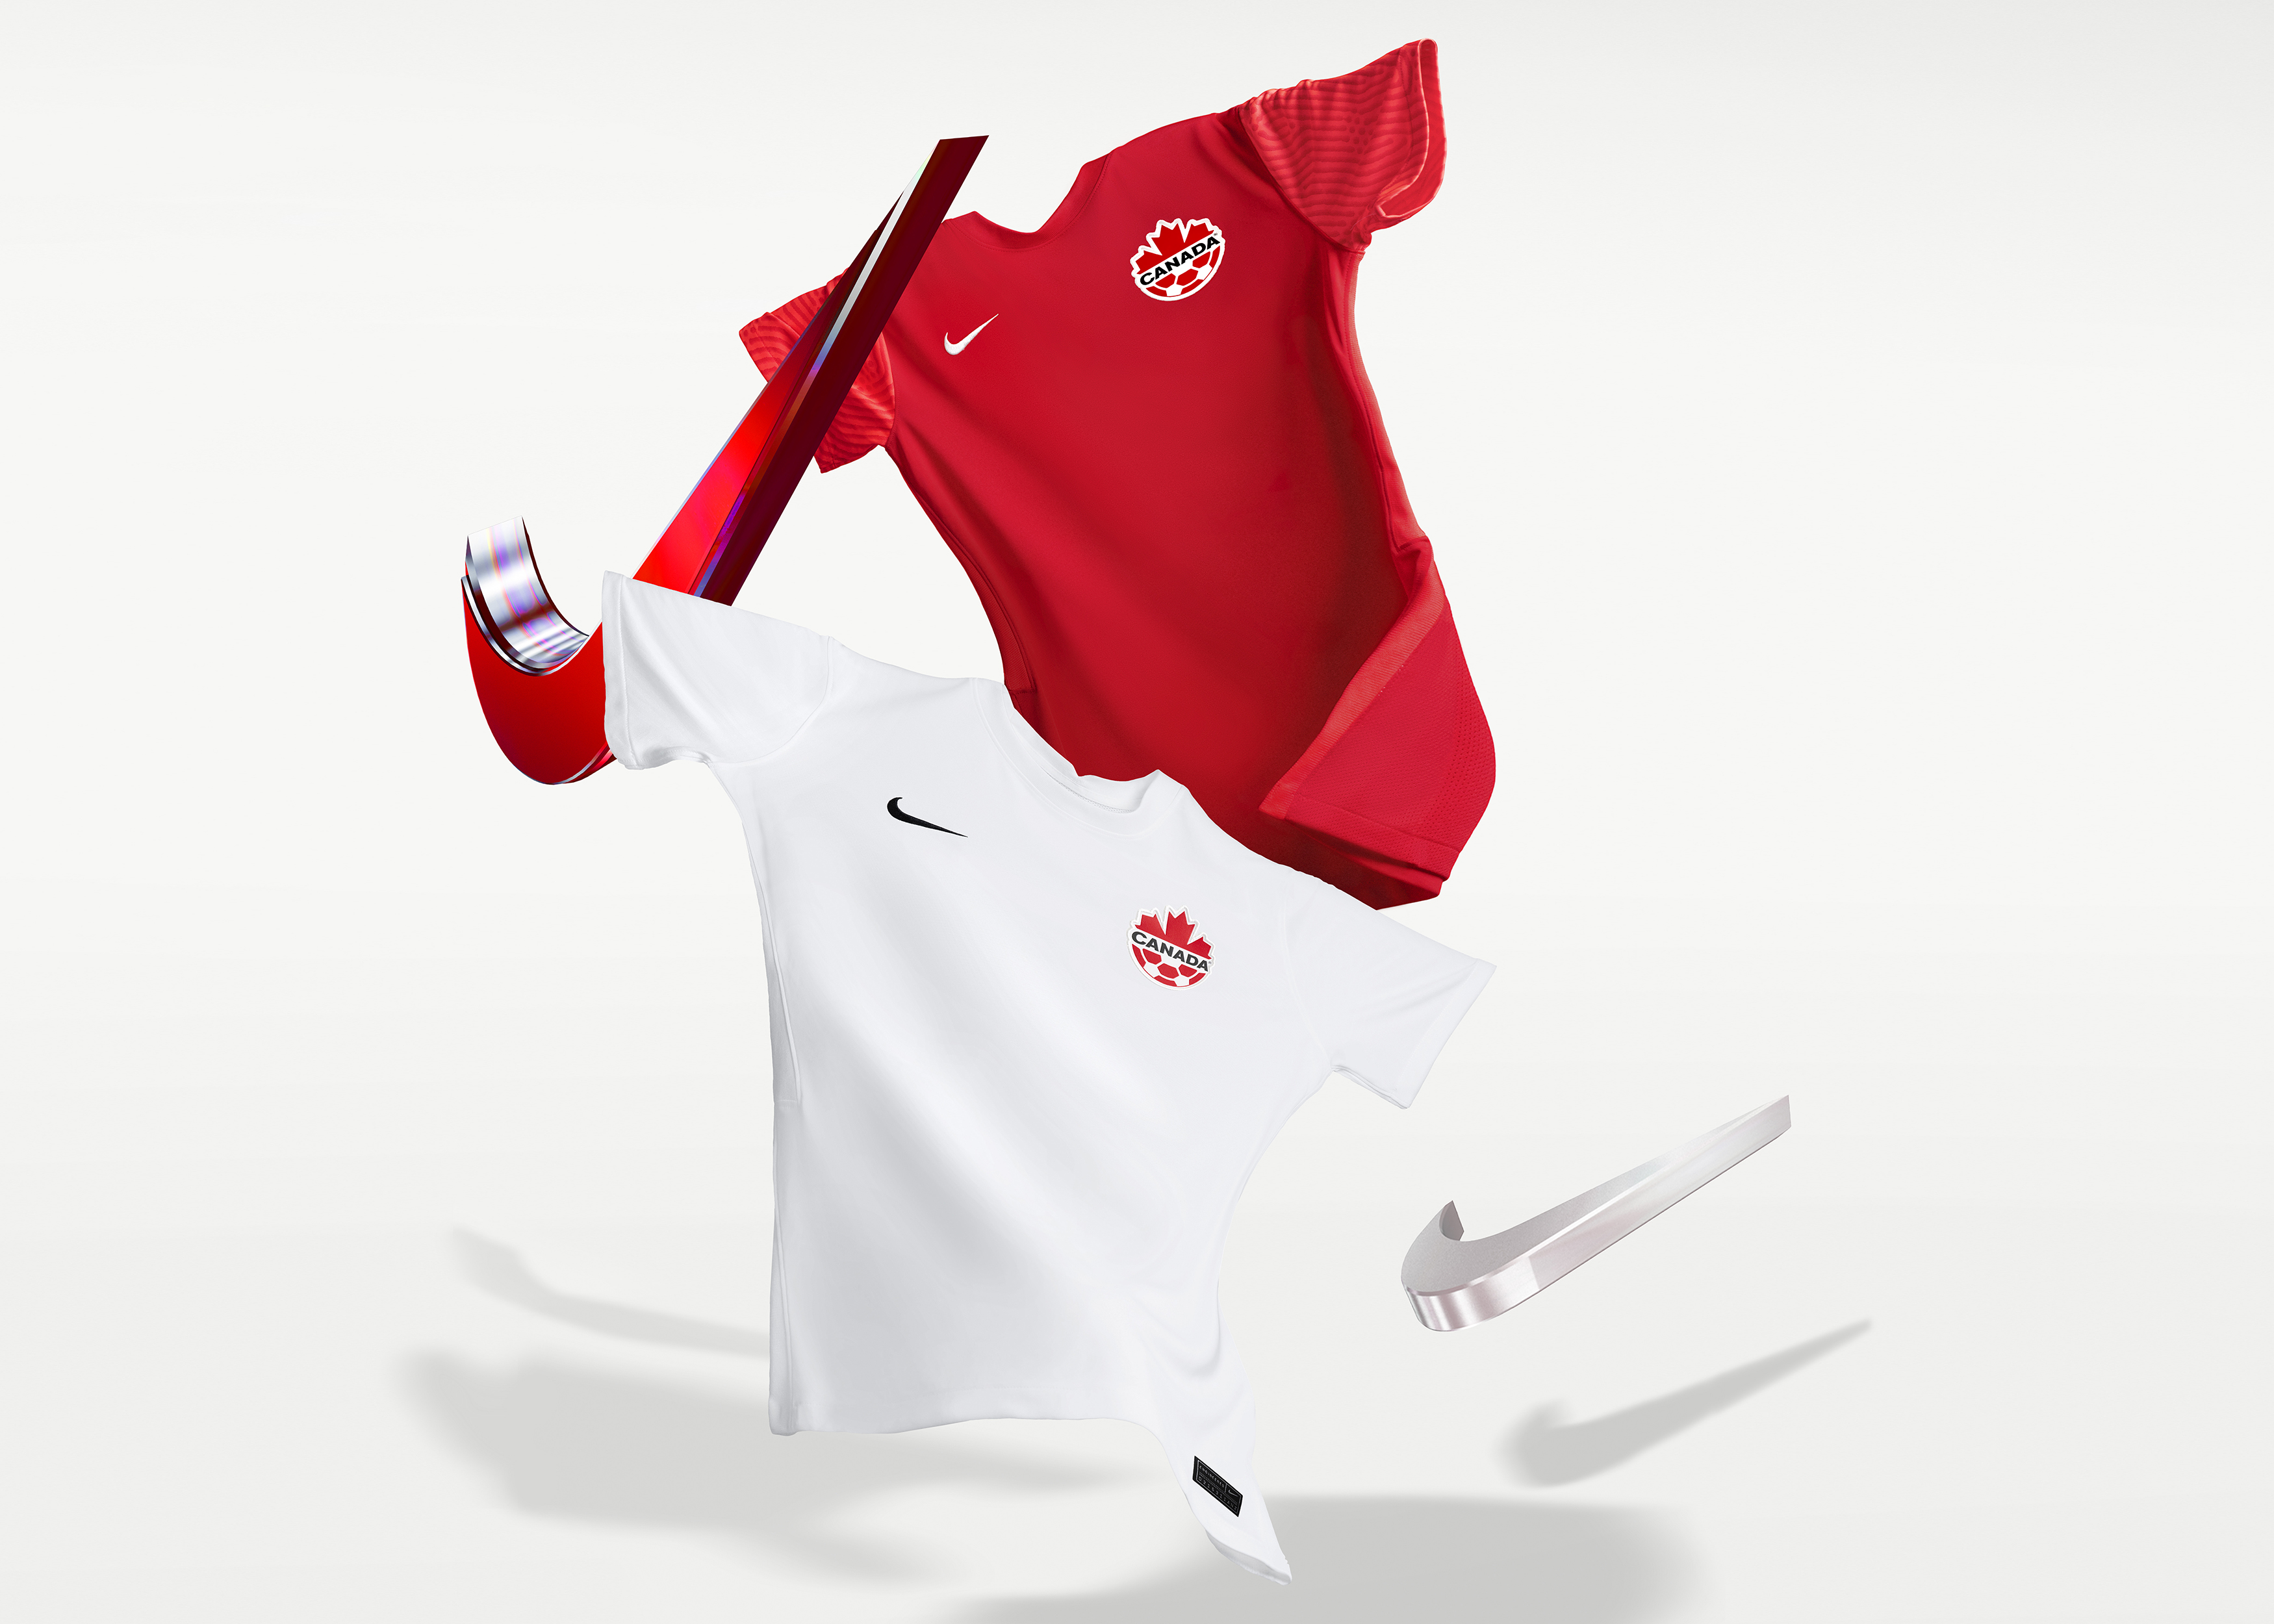 Canadian Soccer fans create a World Cup kit that celebrates the